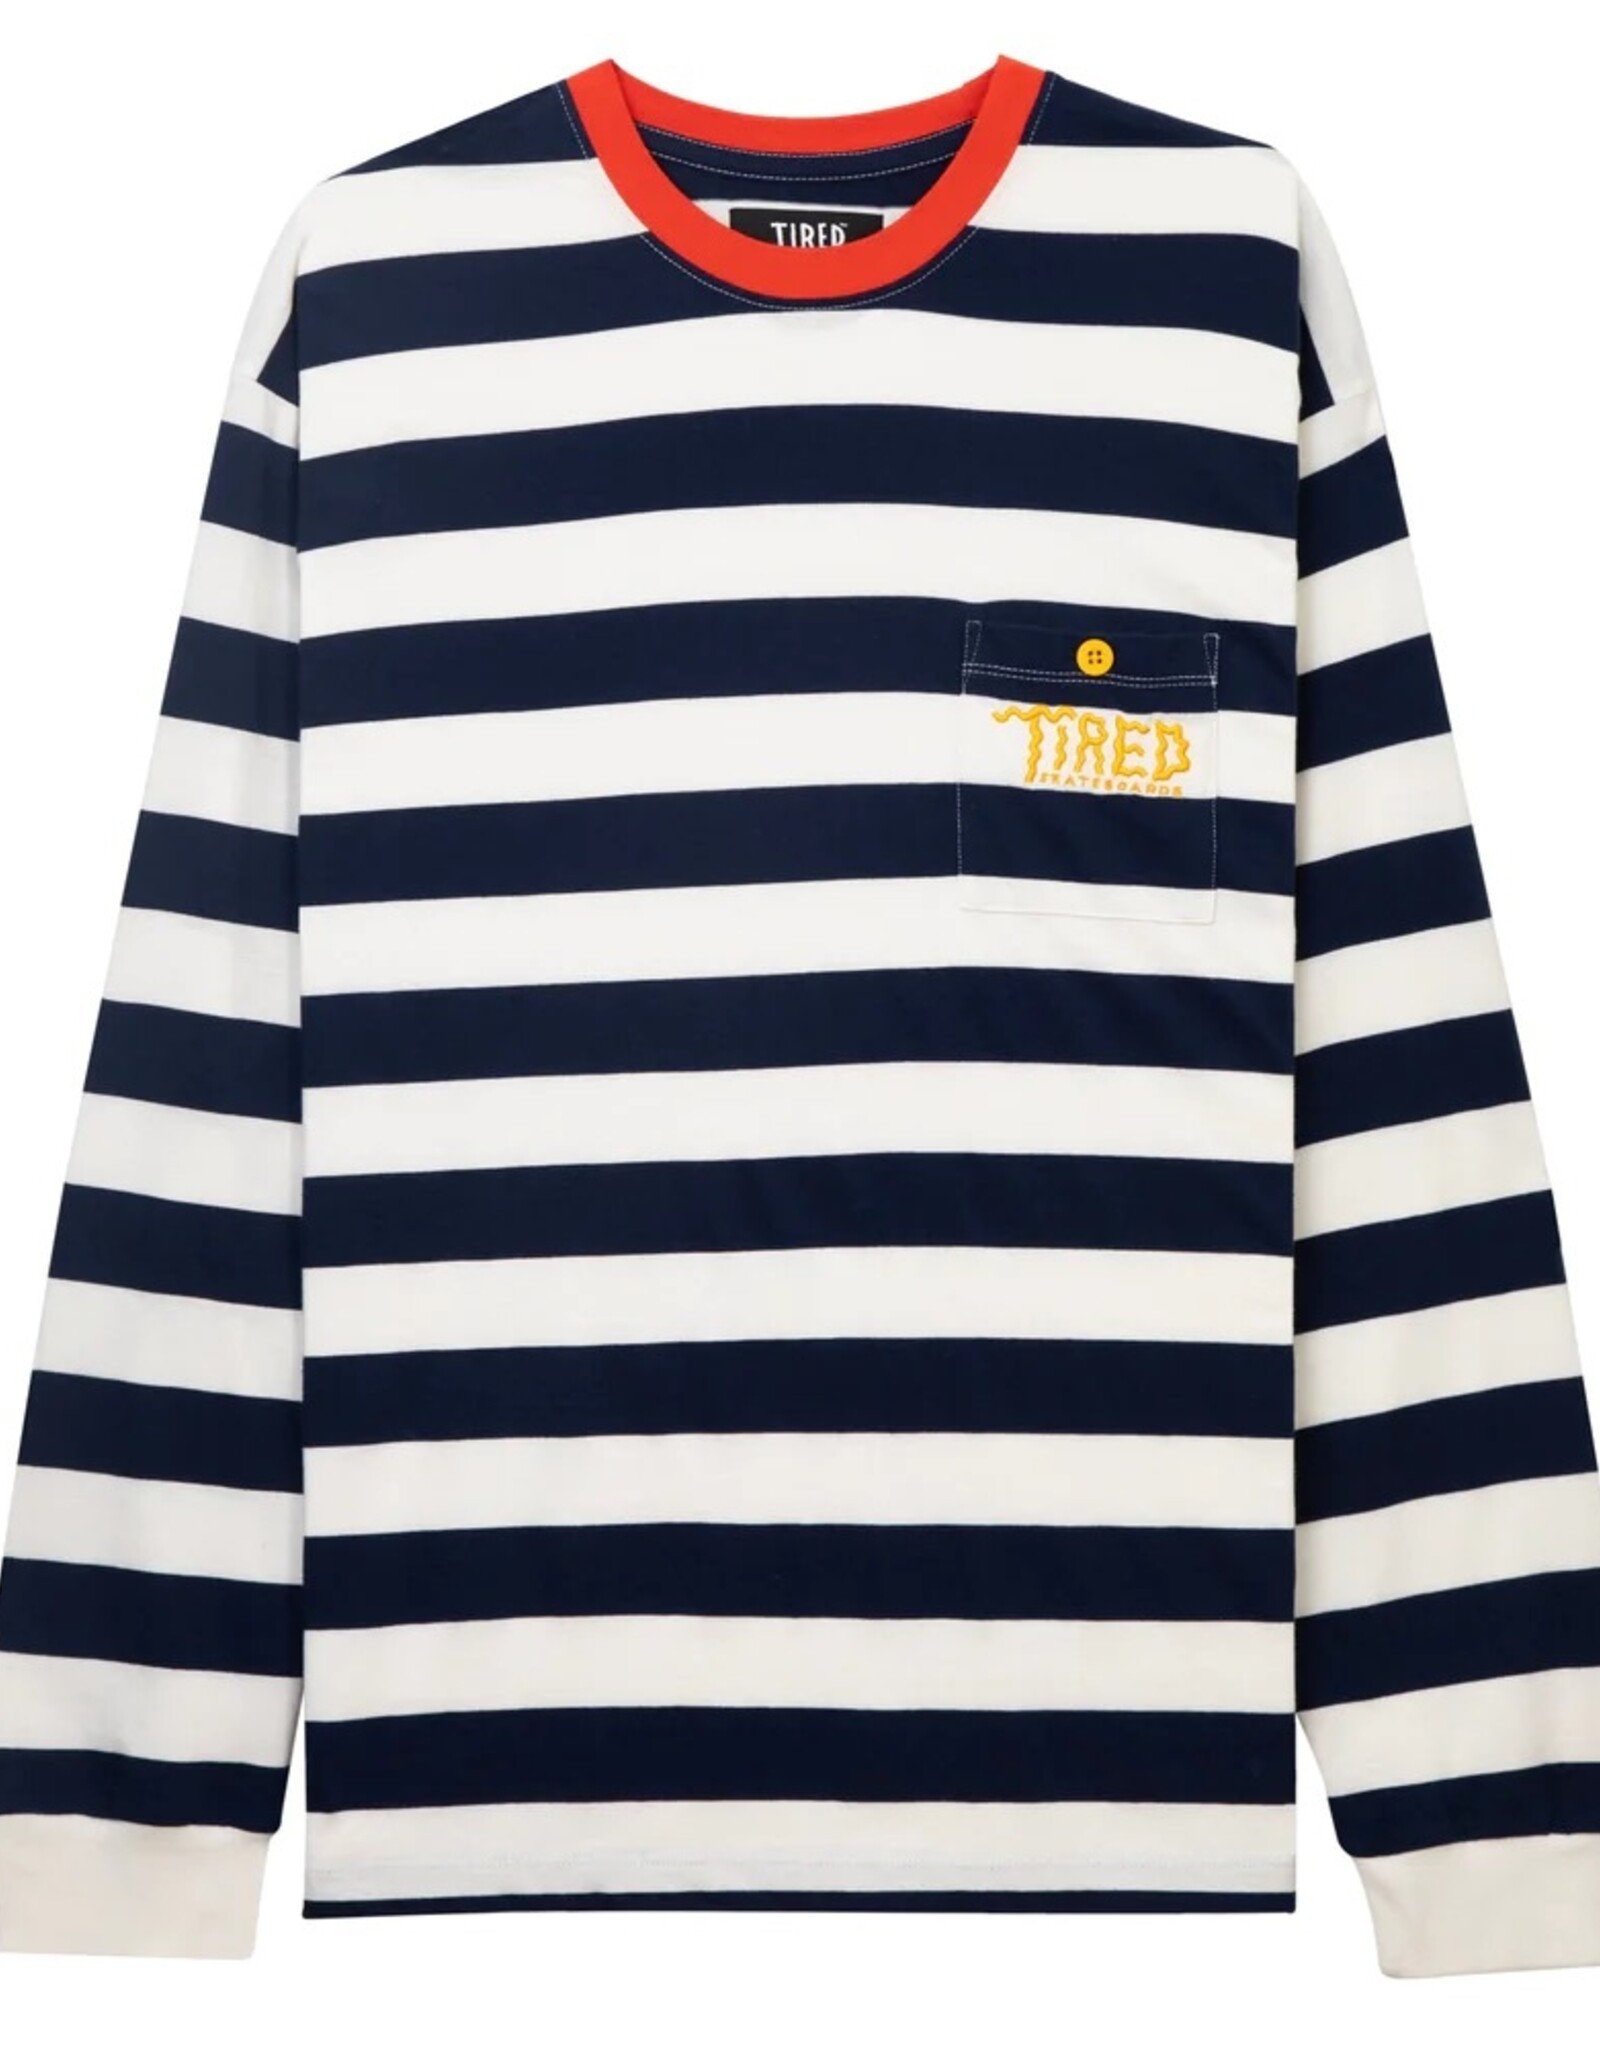 TIRED SKATEBOARDS TIRED SQUIGGLE LOGO STRIPED L/S - RED NAVY